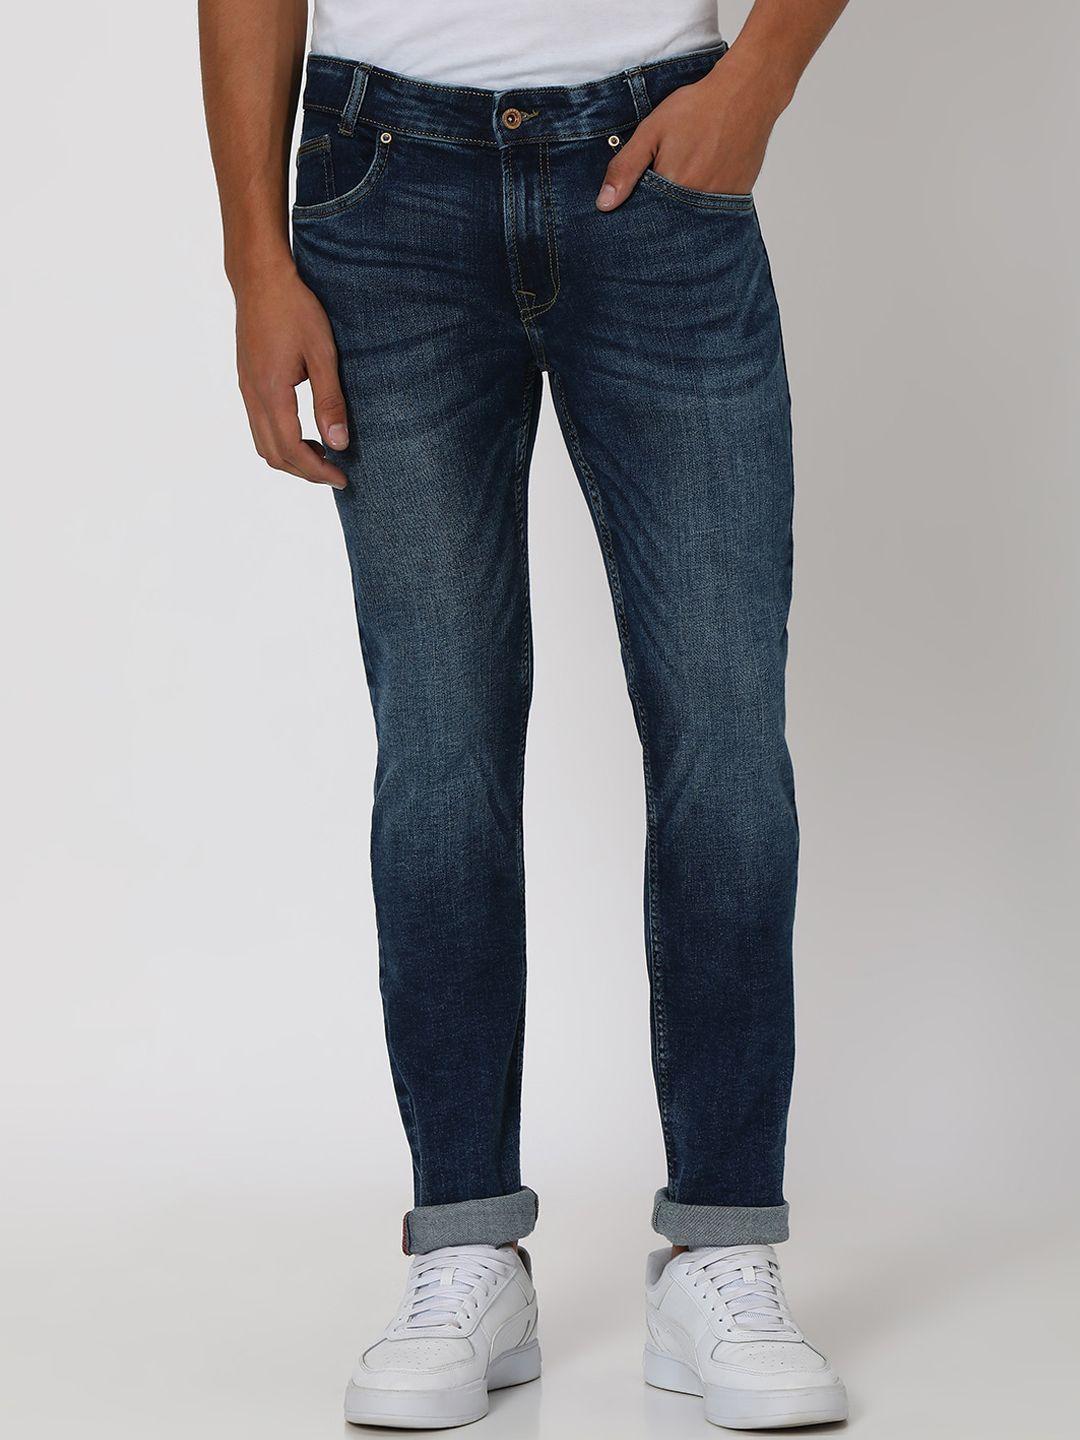 mufti-men-skinny-fit-mid-rise-clean-look-heavy-fade-stretchable-jeans